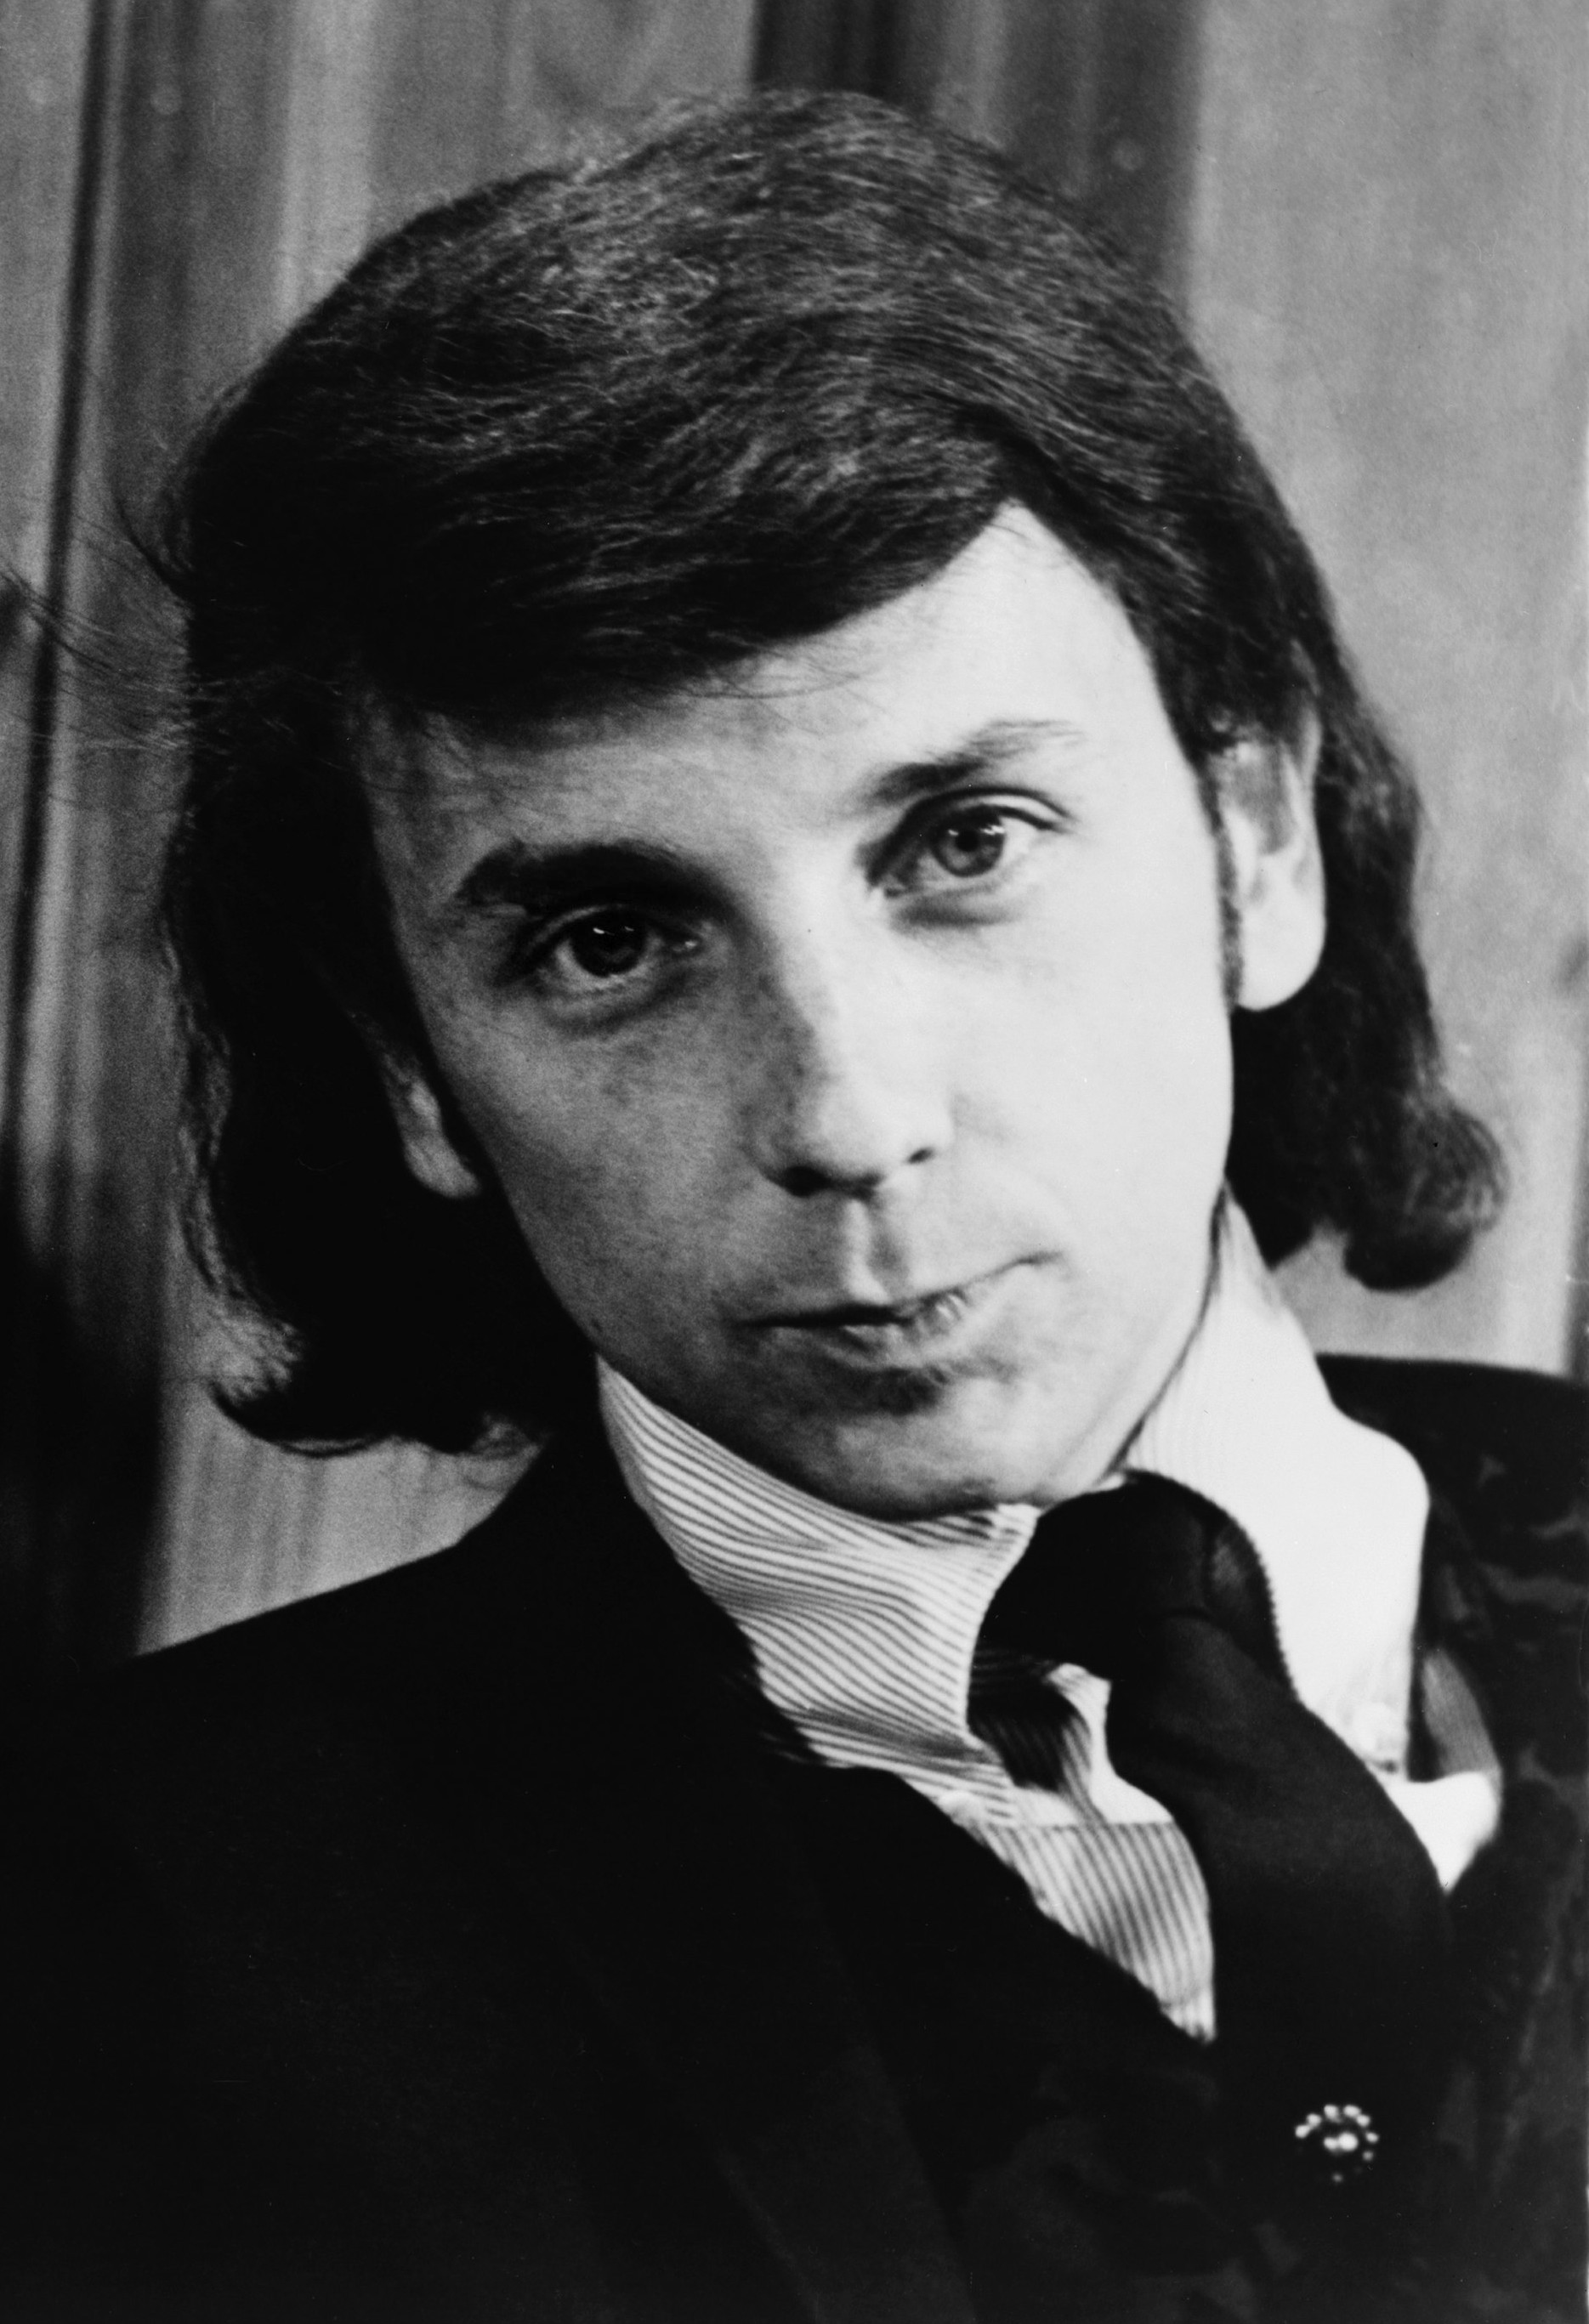 Commentary: Phil Spector was brilliant but disturbed record producer ...